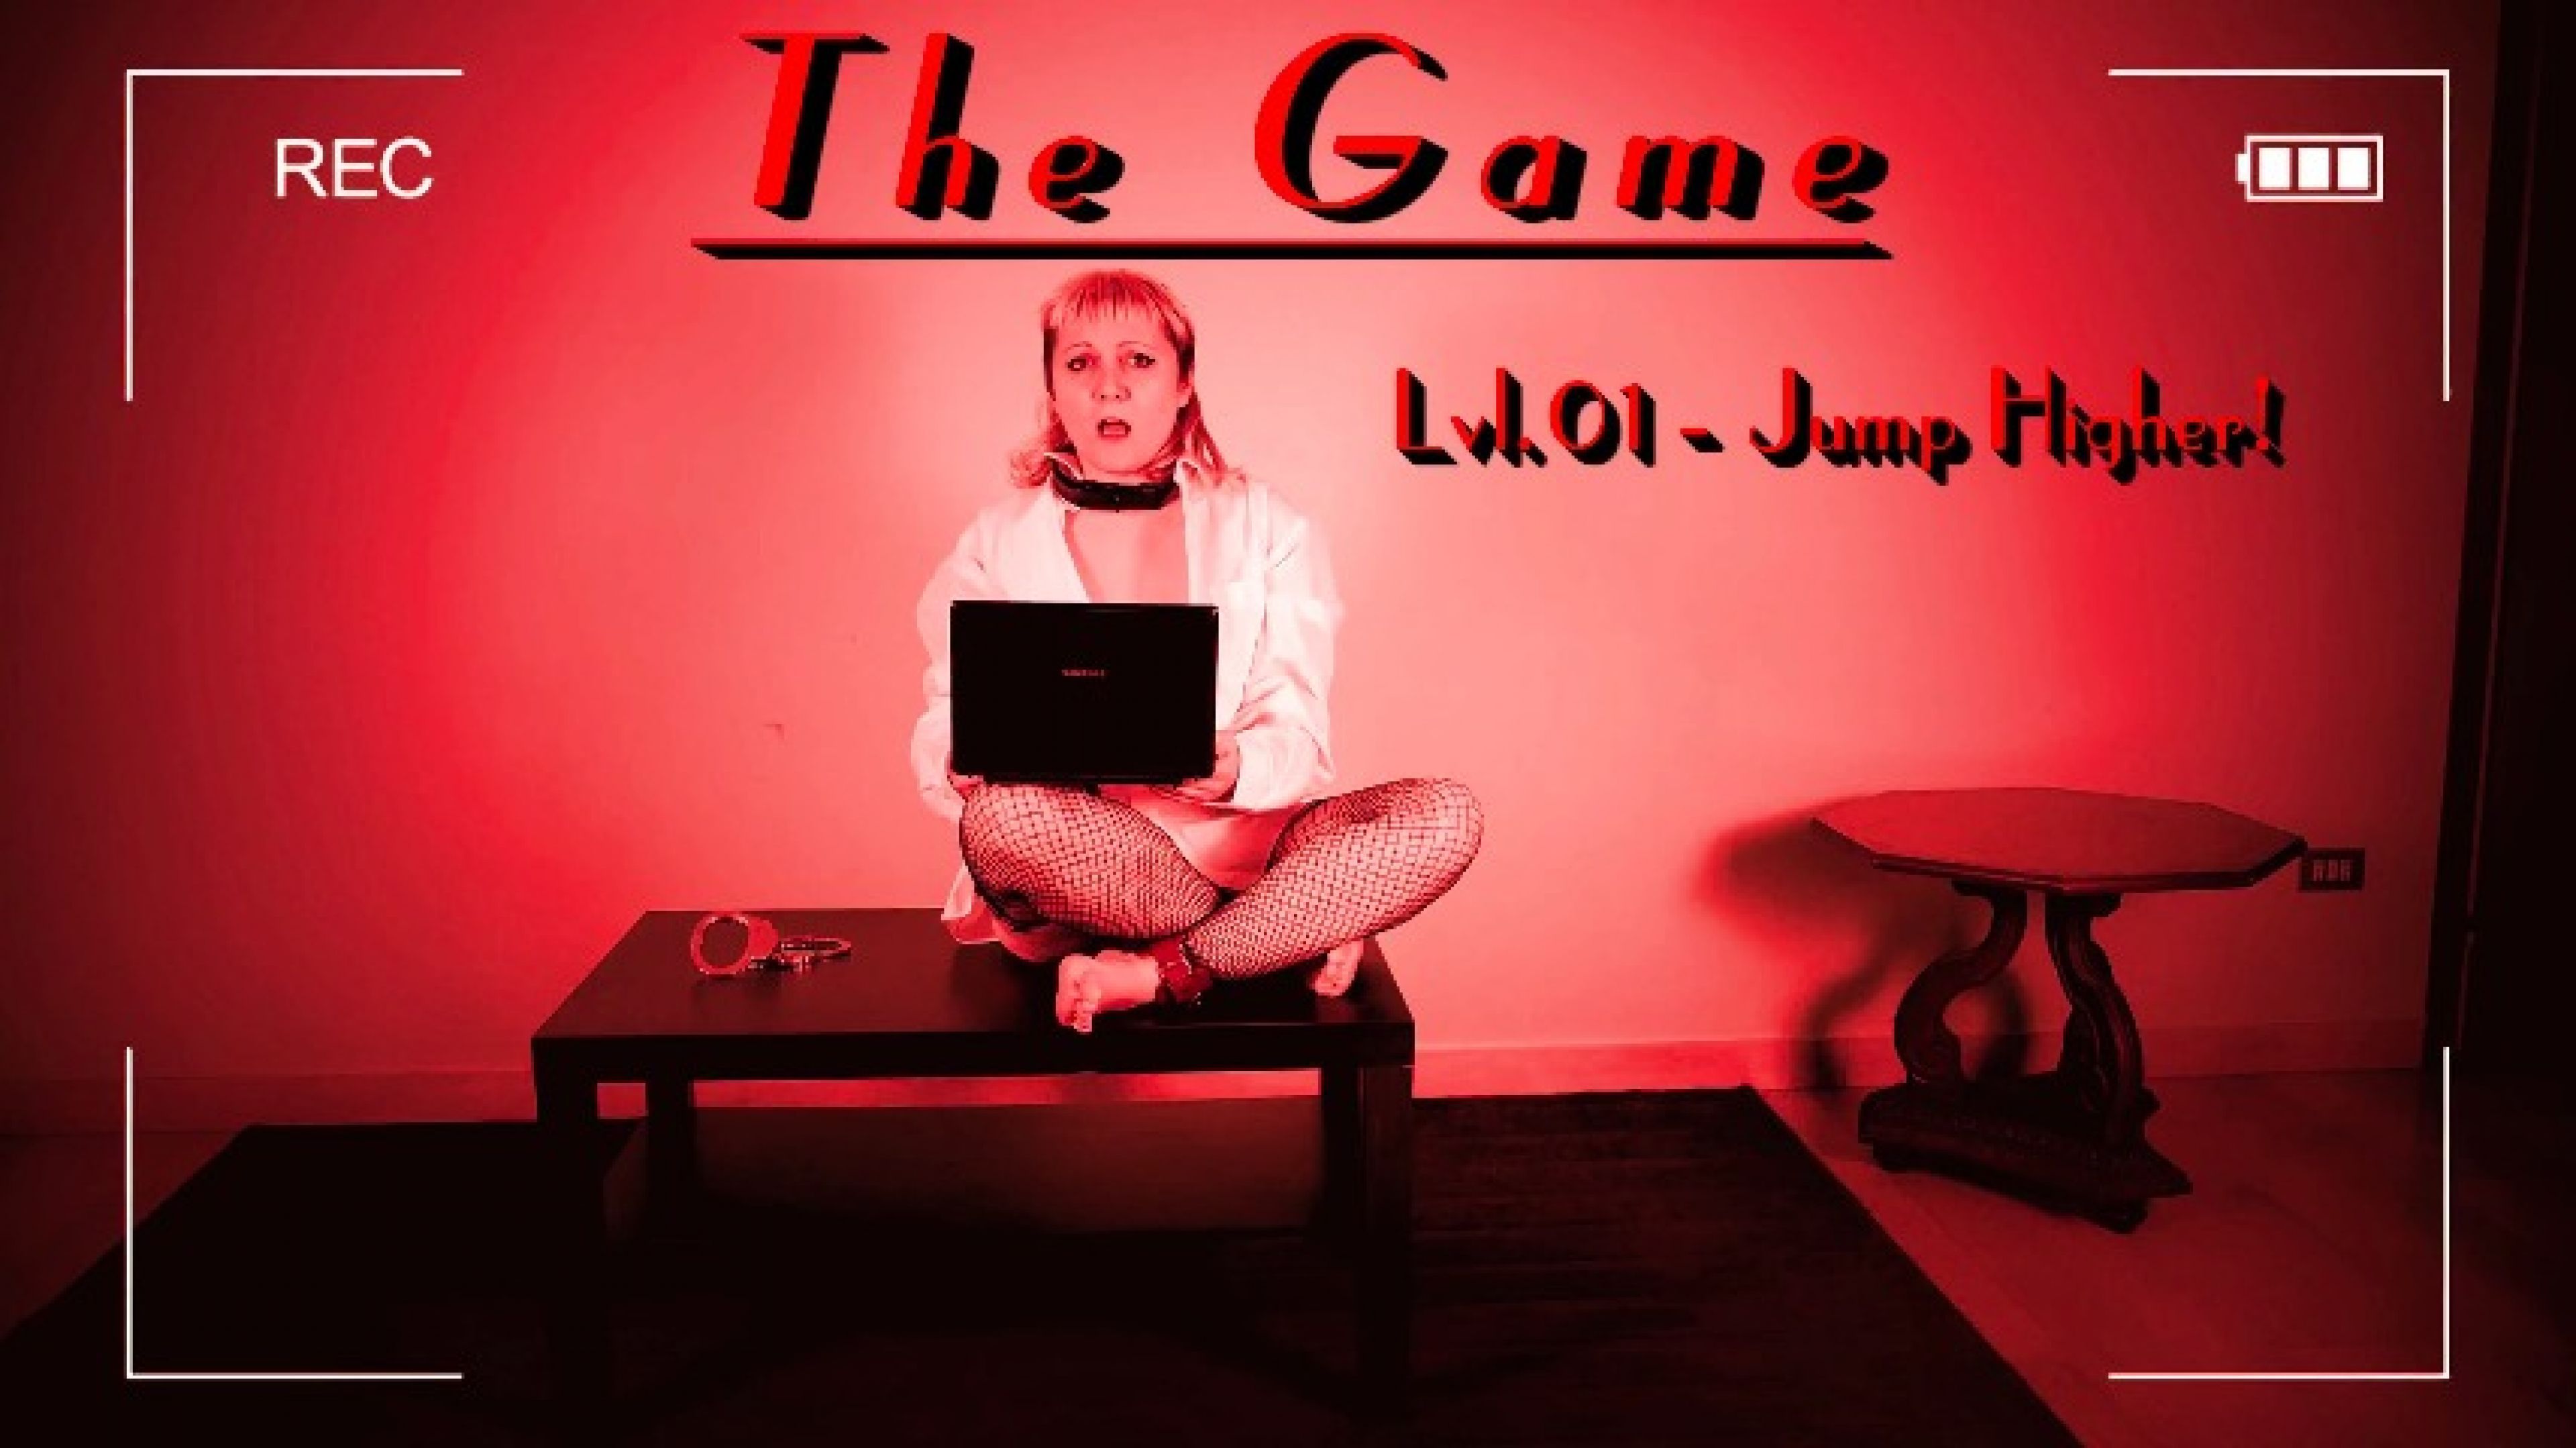 THE GAME Lvl 01 - Jump Higher - A LMproduction Series